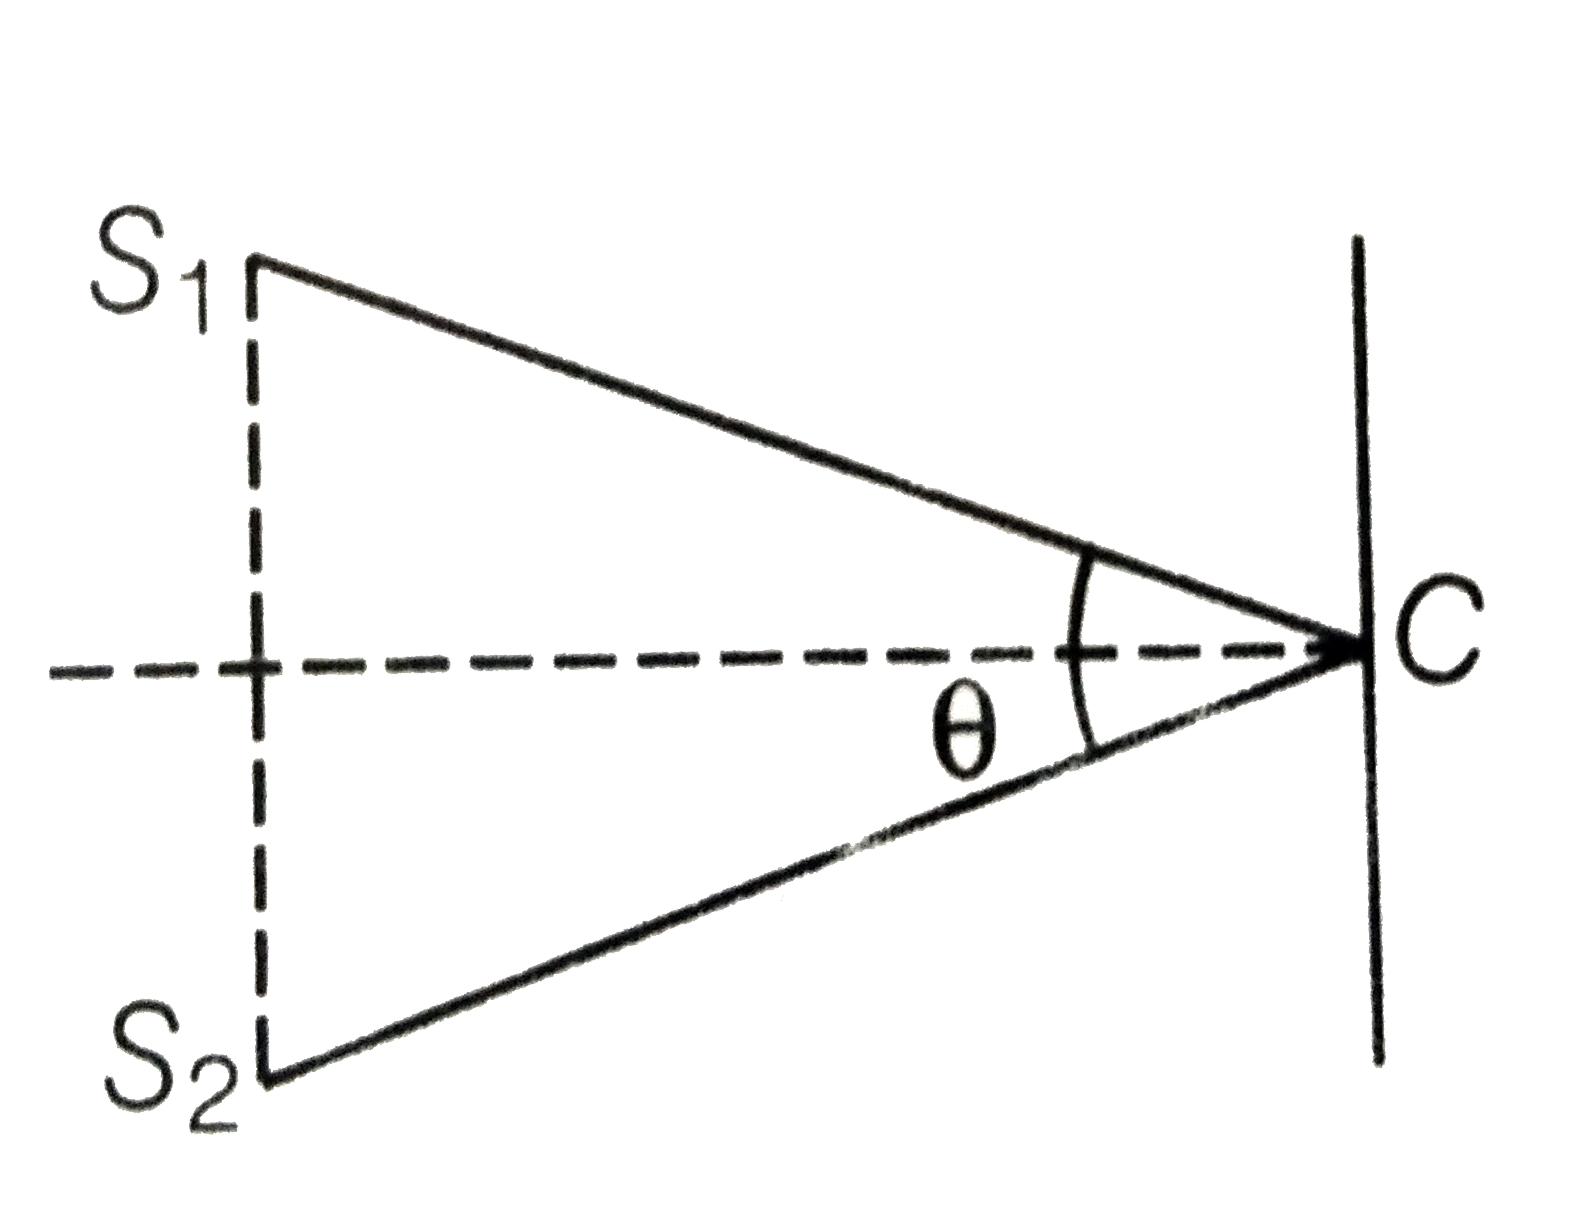 Young's double slit experimental arrangement is shown in figure. If lamda is the wavelength of light used and angleS(1)CS(2)=theta, then the fringe width will be